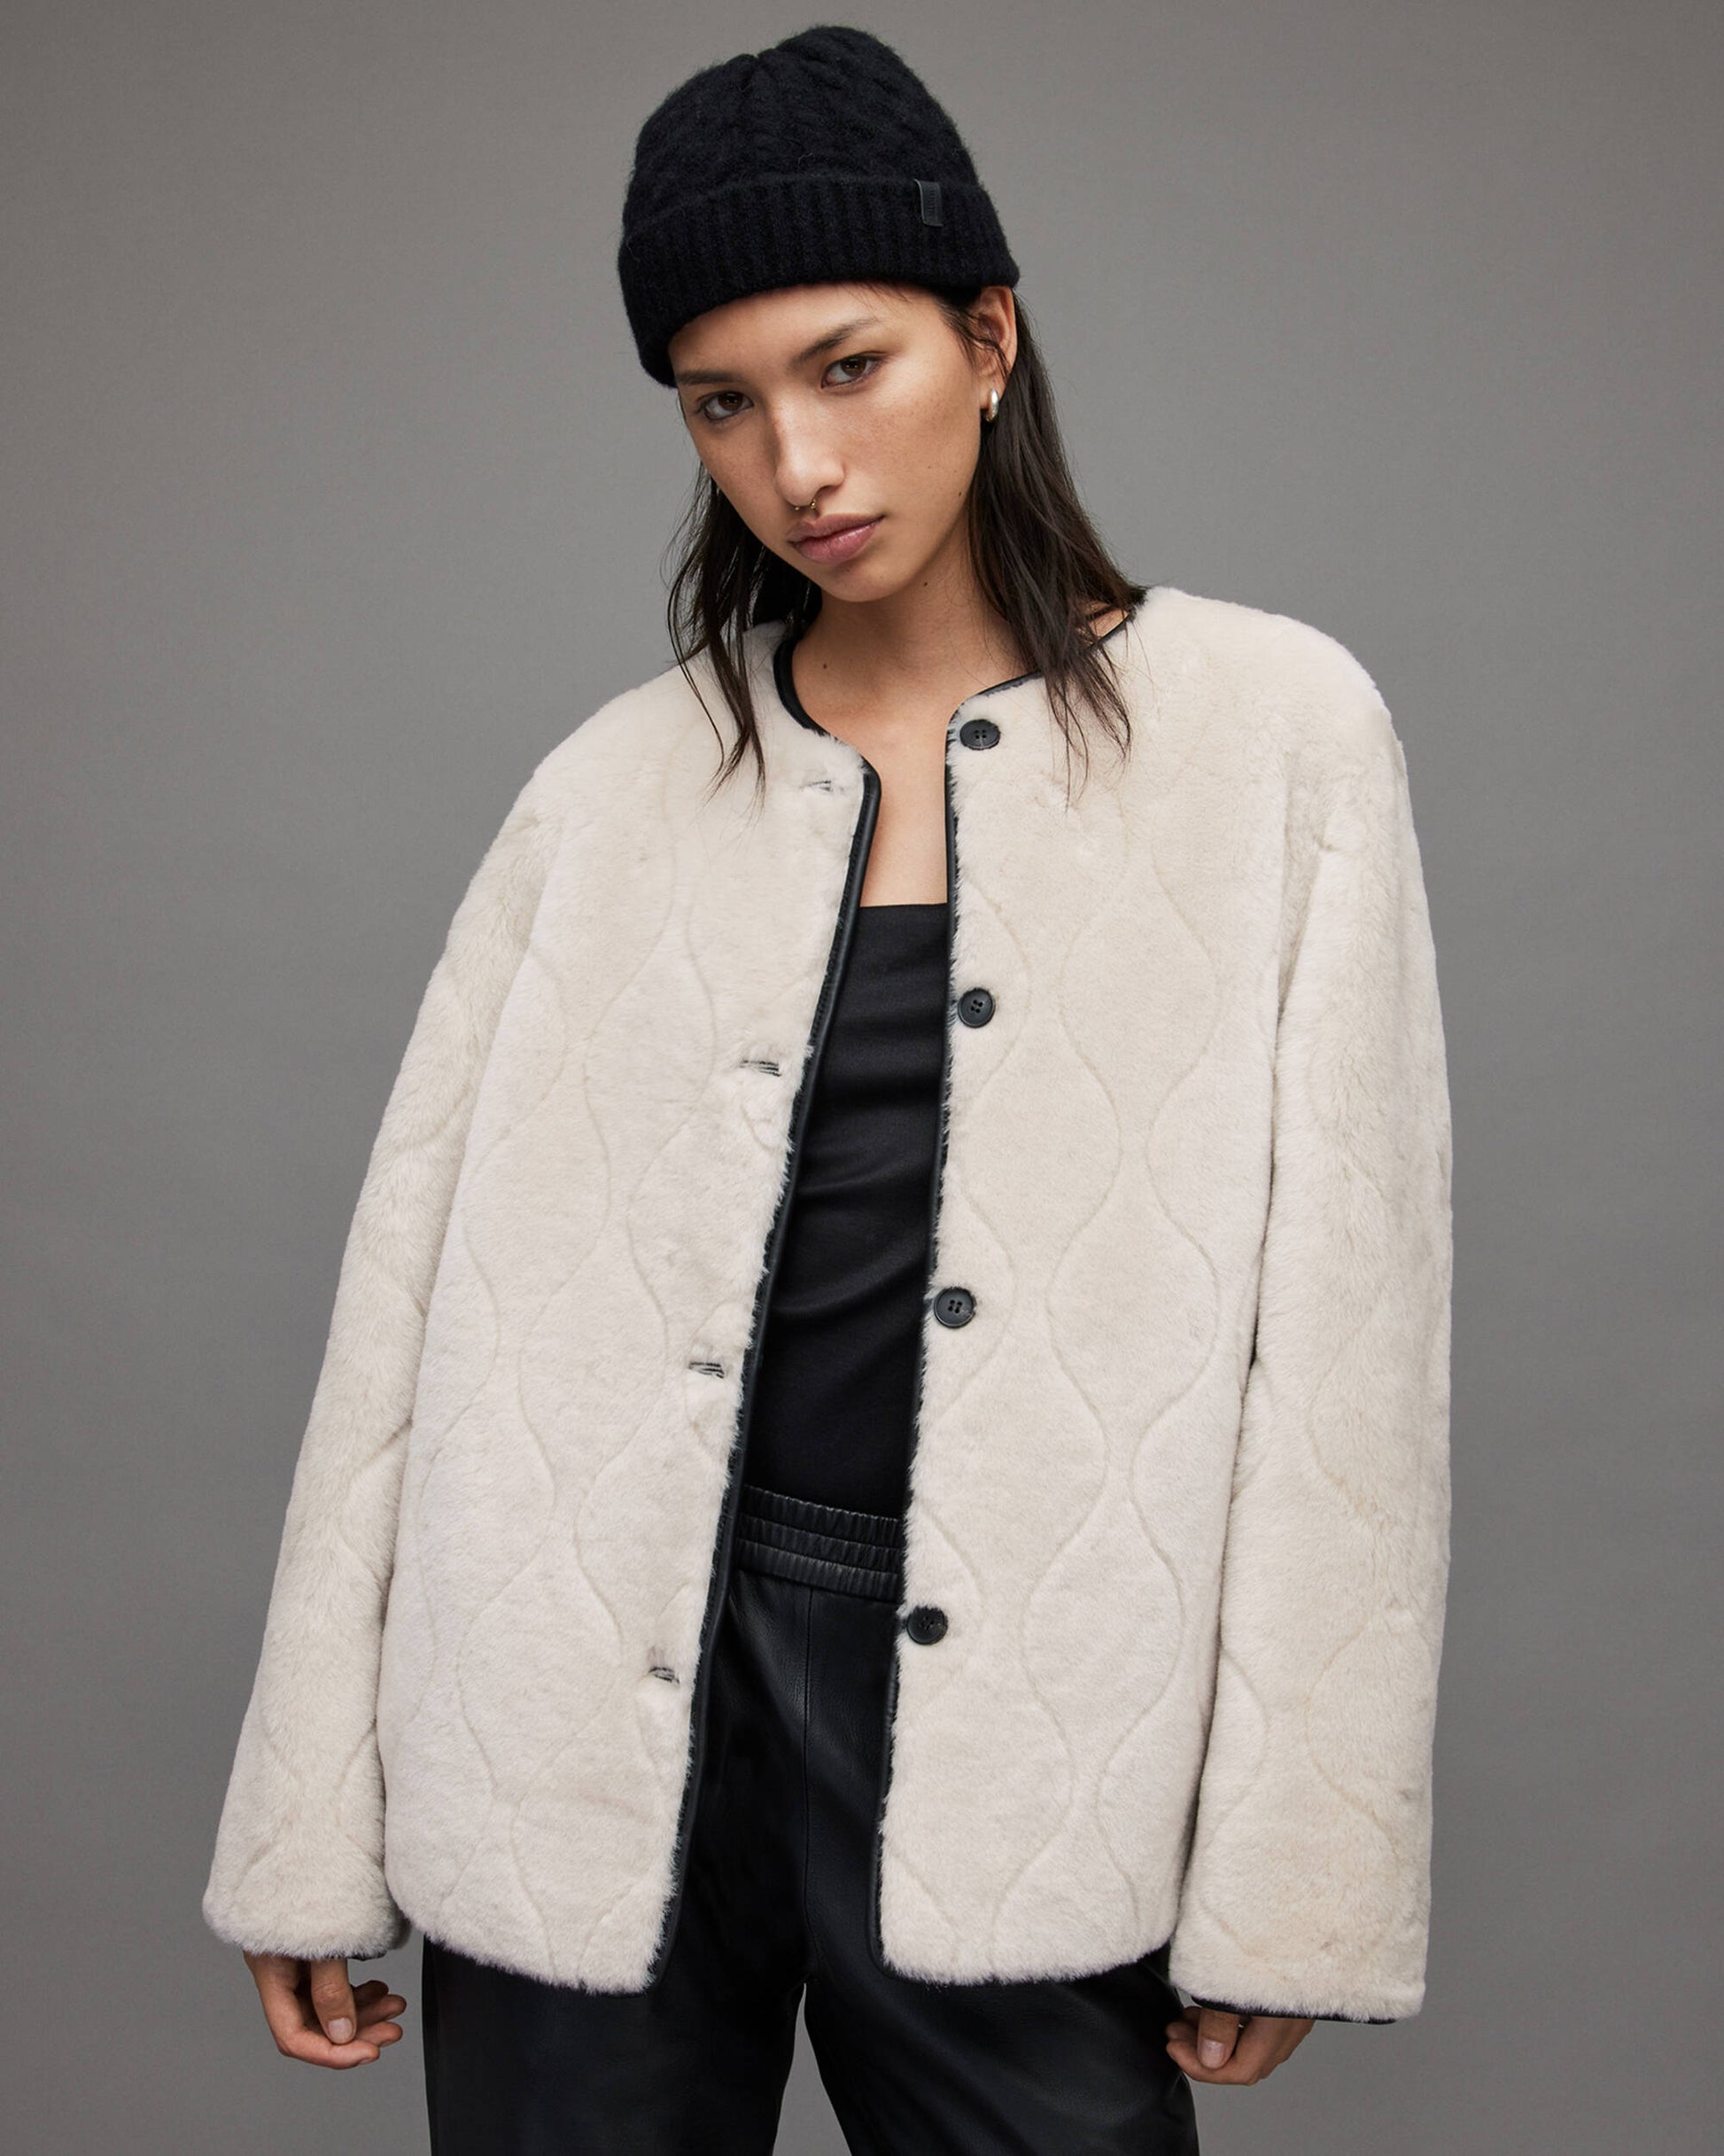 Women's Double Sided Black Leather & White Shearling Jacket